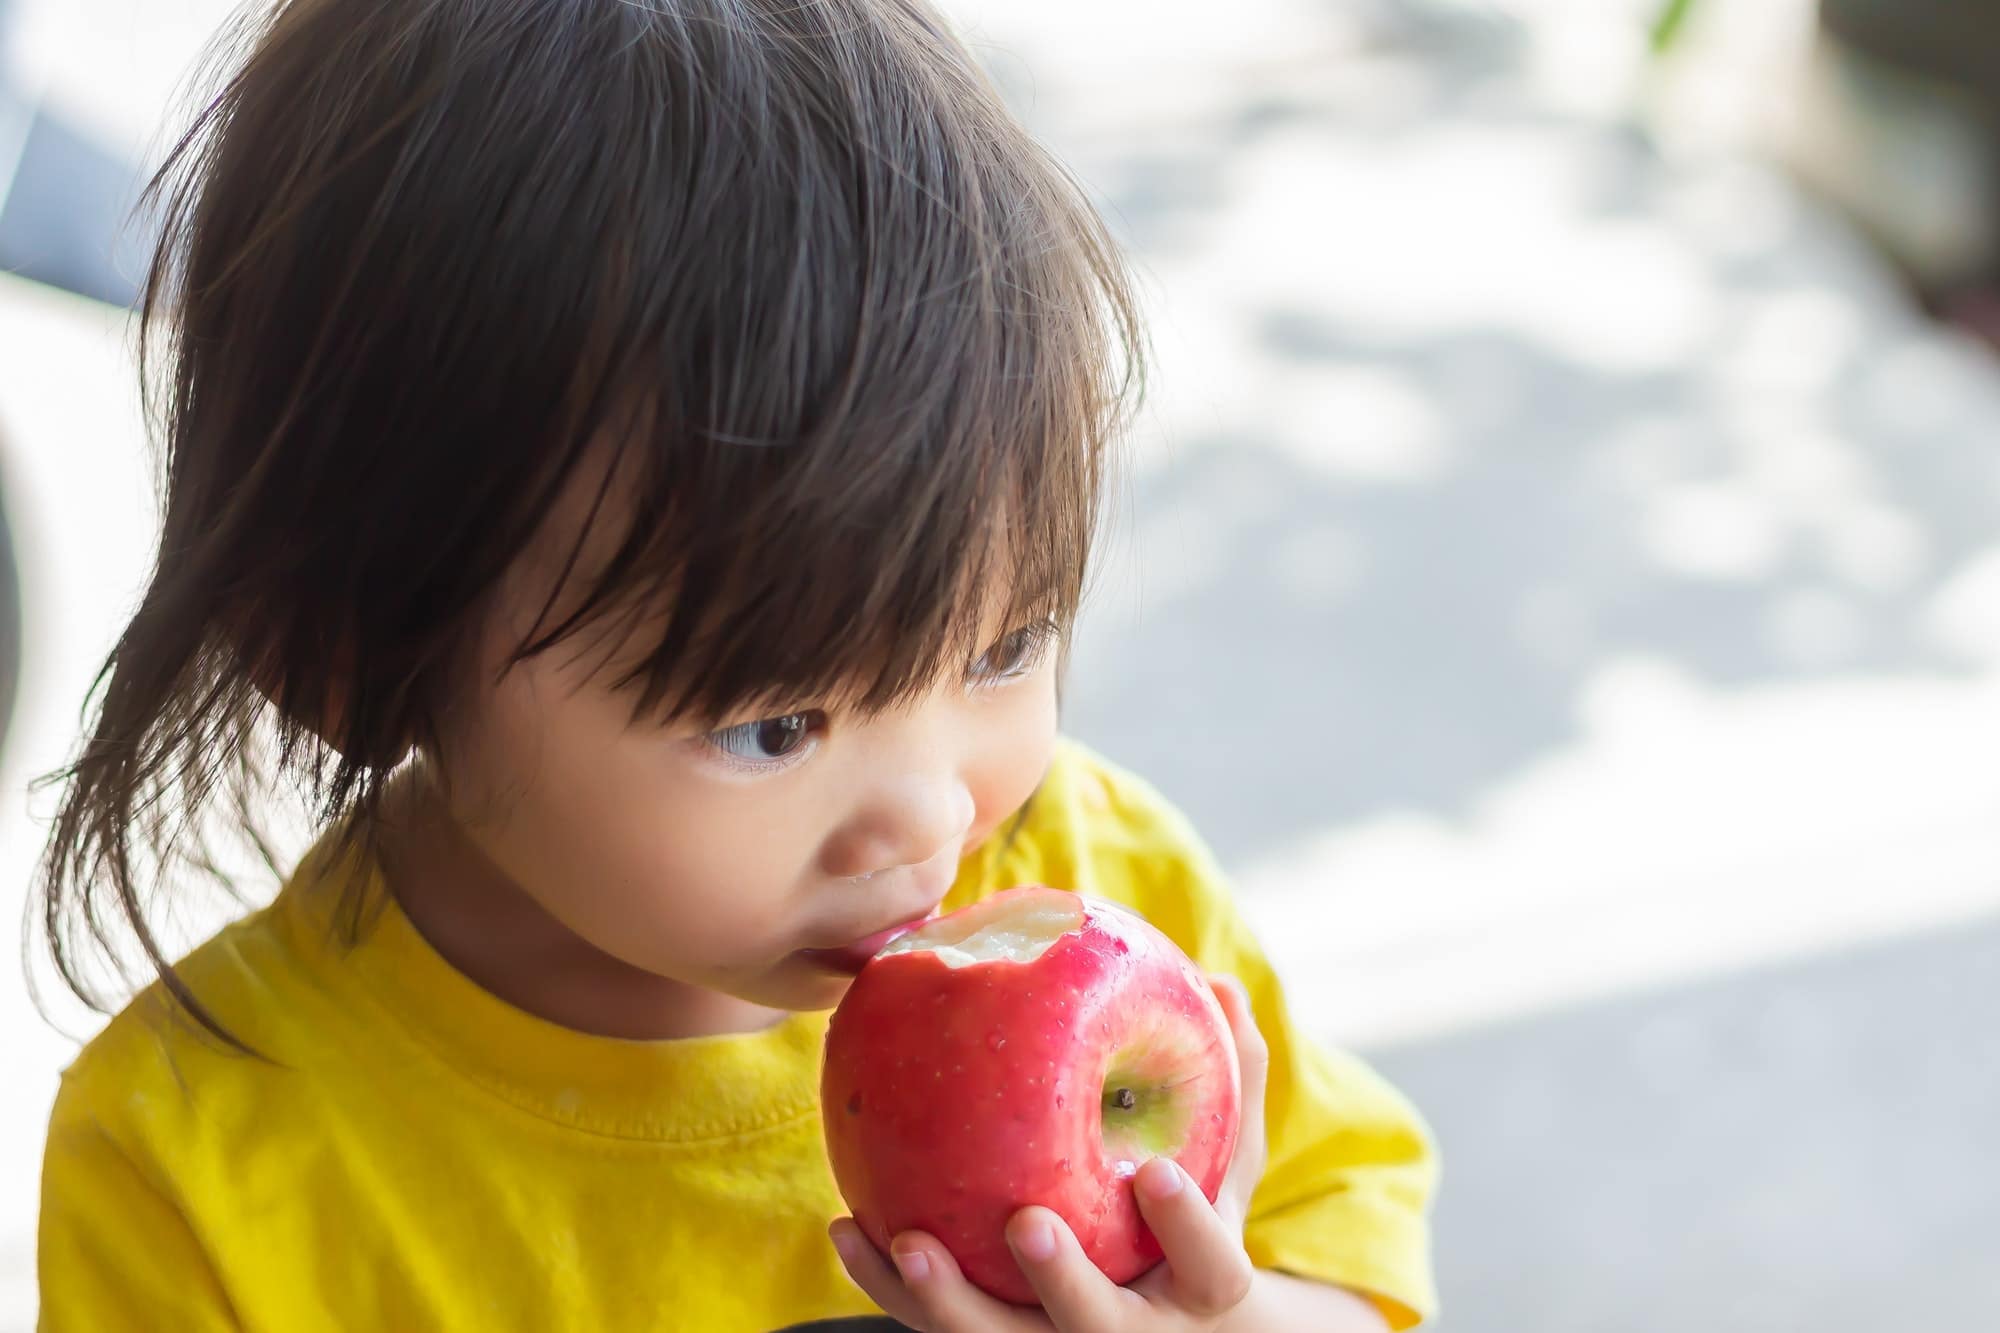 Baby kid child girl eating and biting an apple fruit.